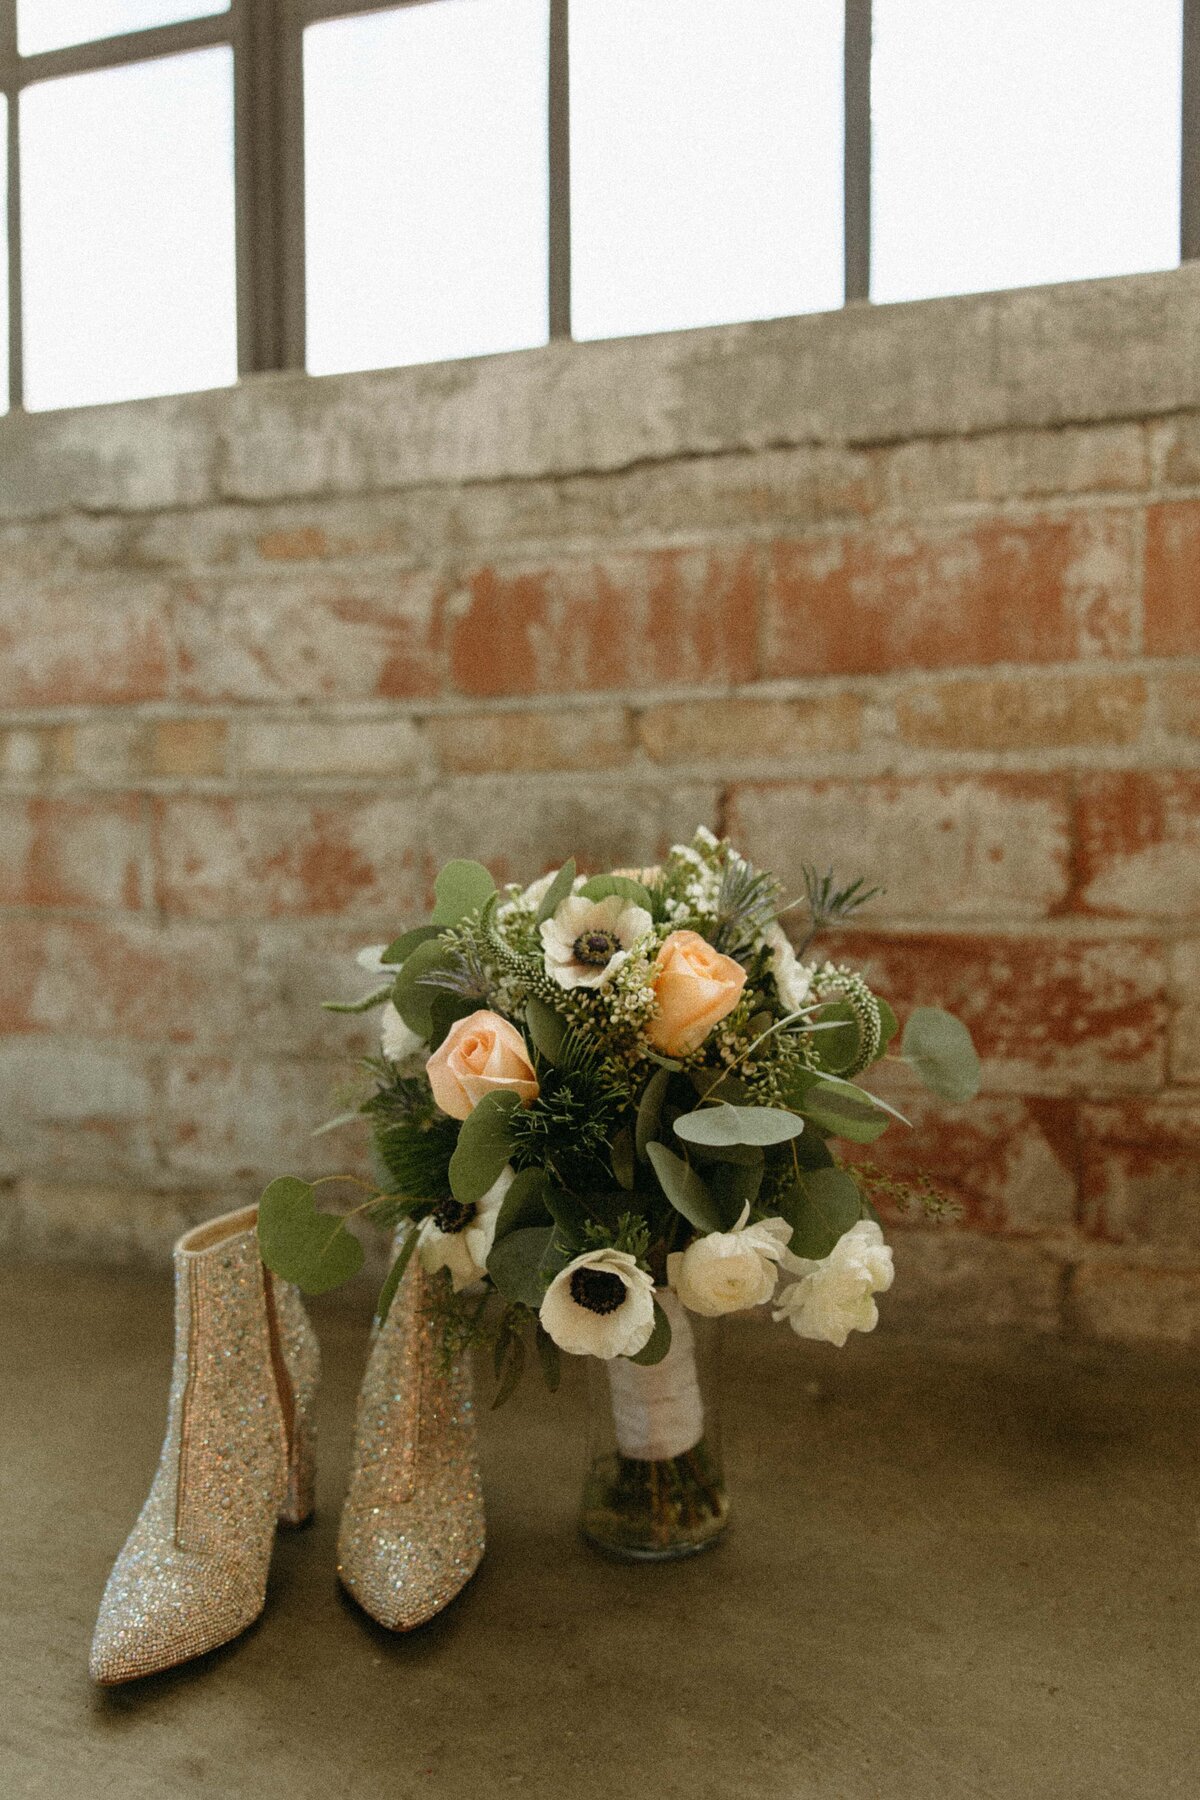 A bridal bouquet of white and soft pink flowers next to glittering high-heeled shoes on a concrete floor, with a brick wall and windows in the background at a Iowa wedding.